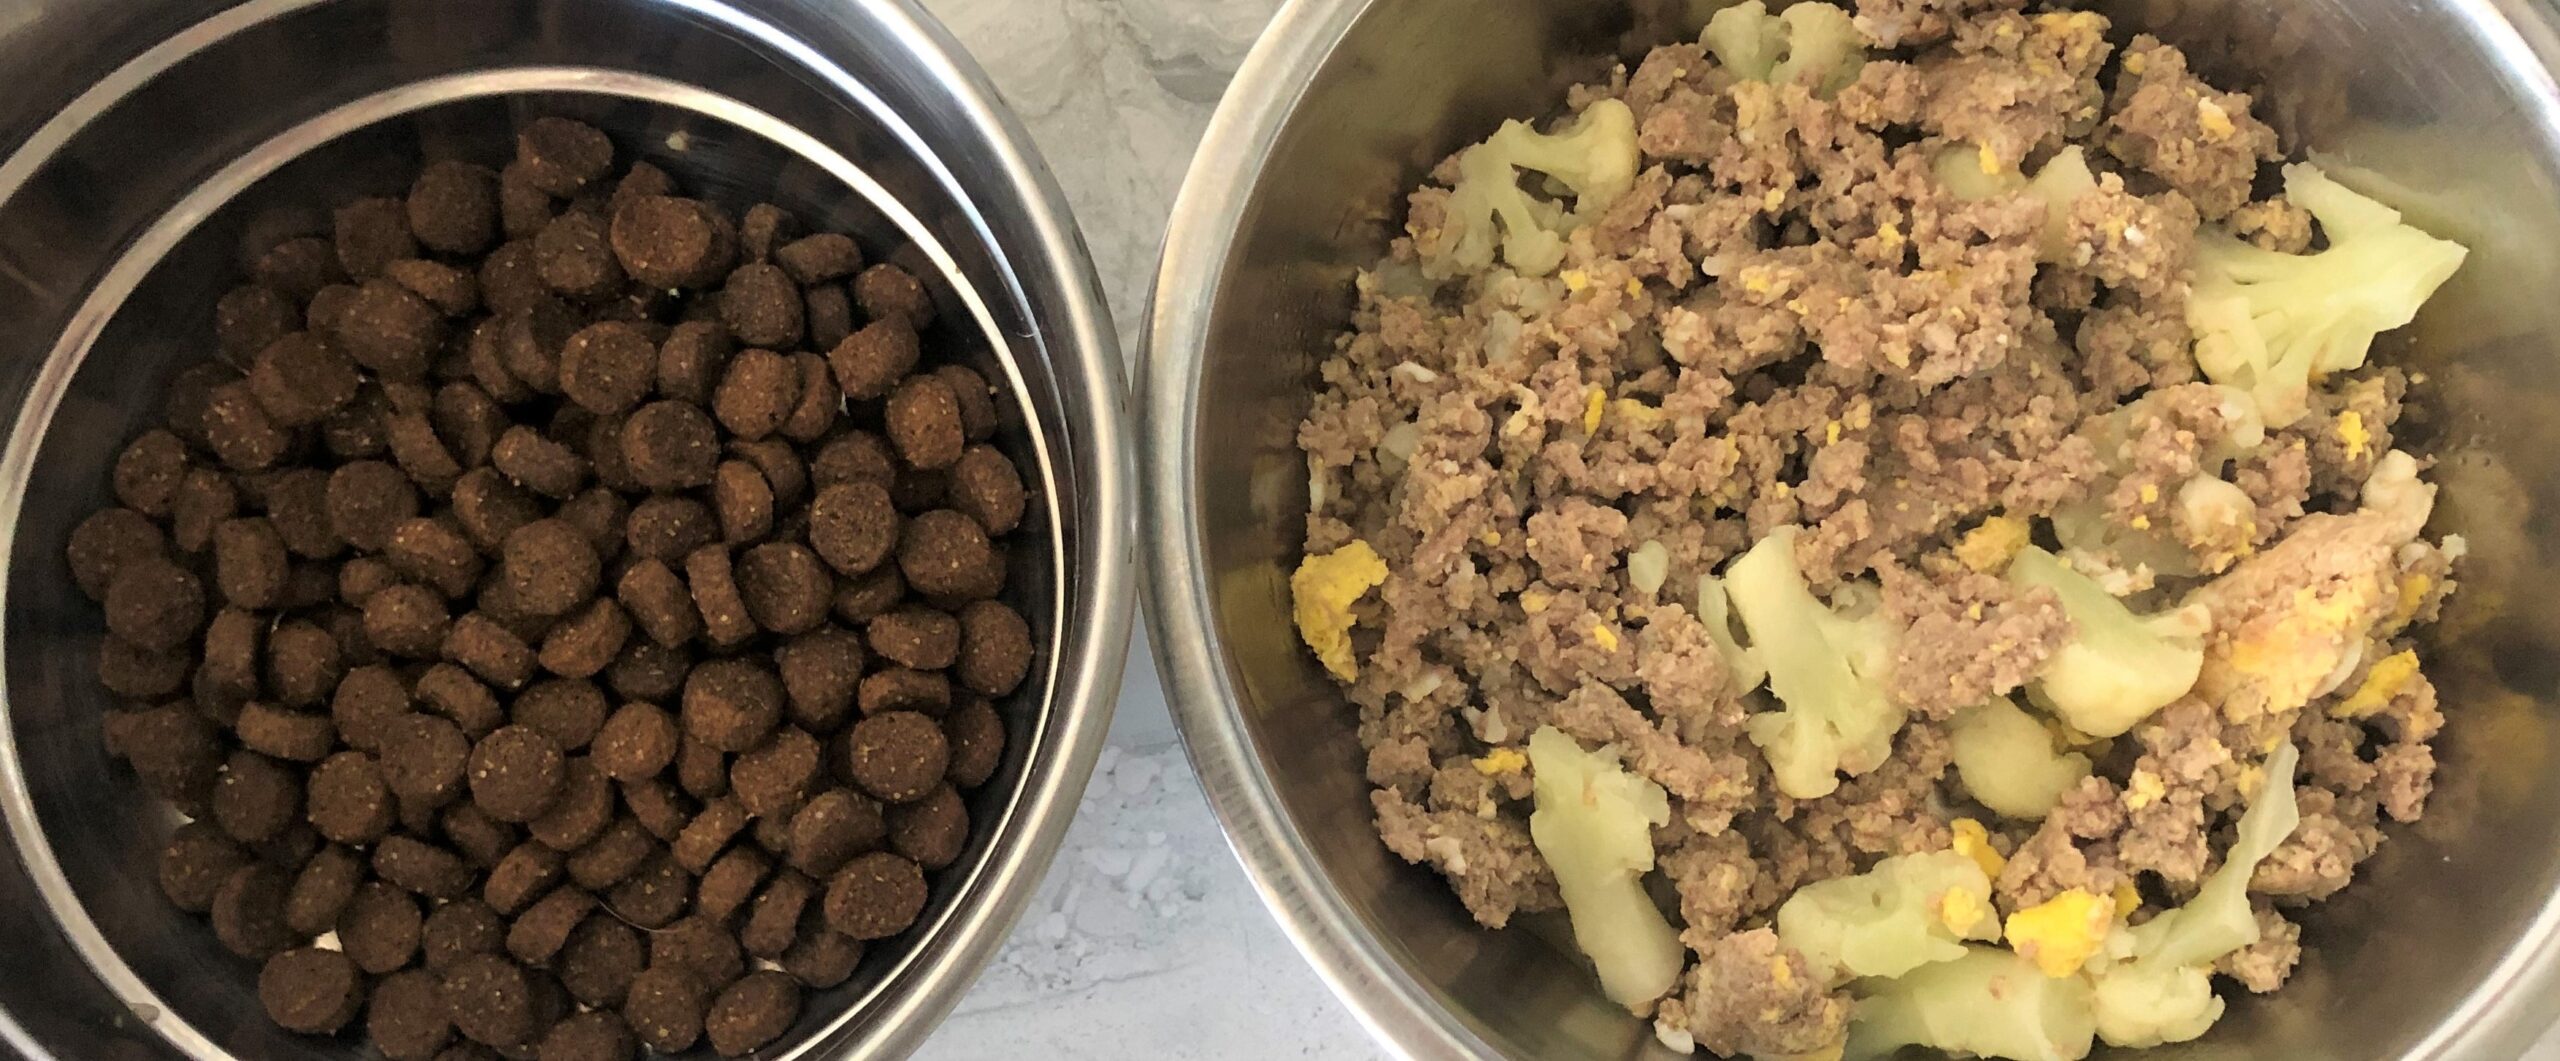 History of Trouble – Commercial Dog Food Risks